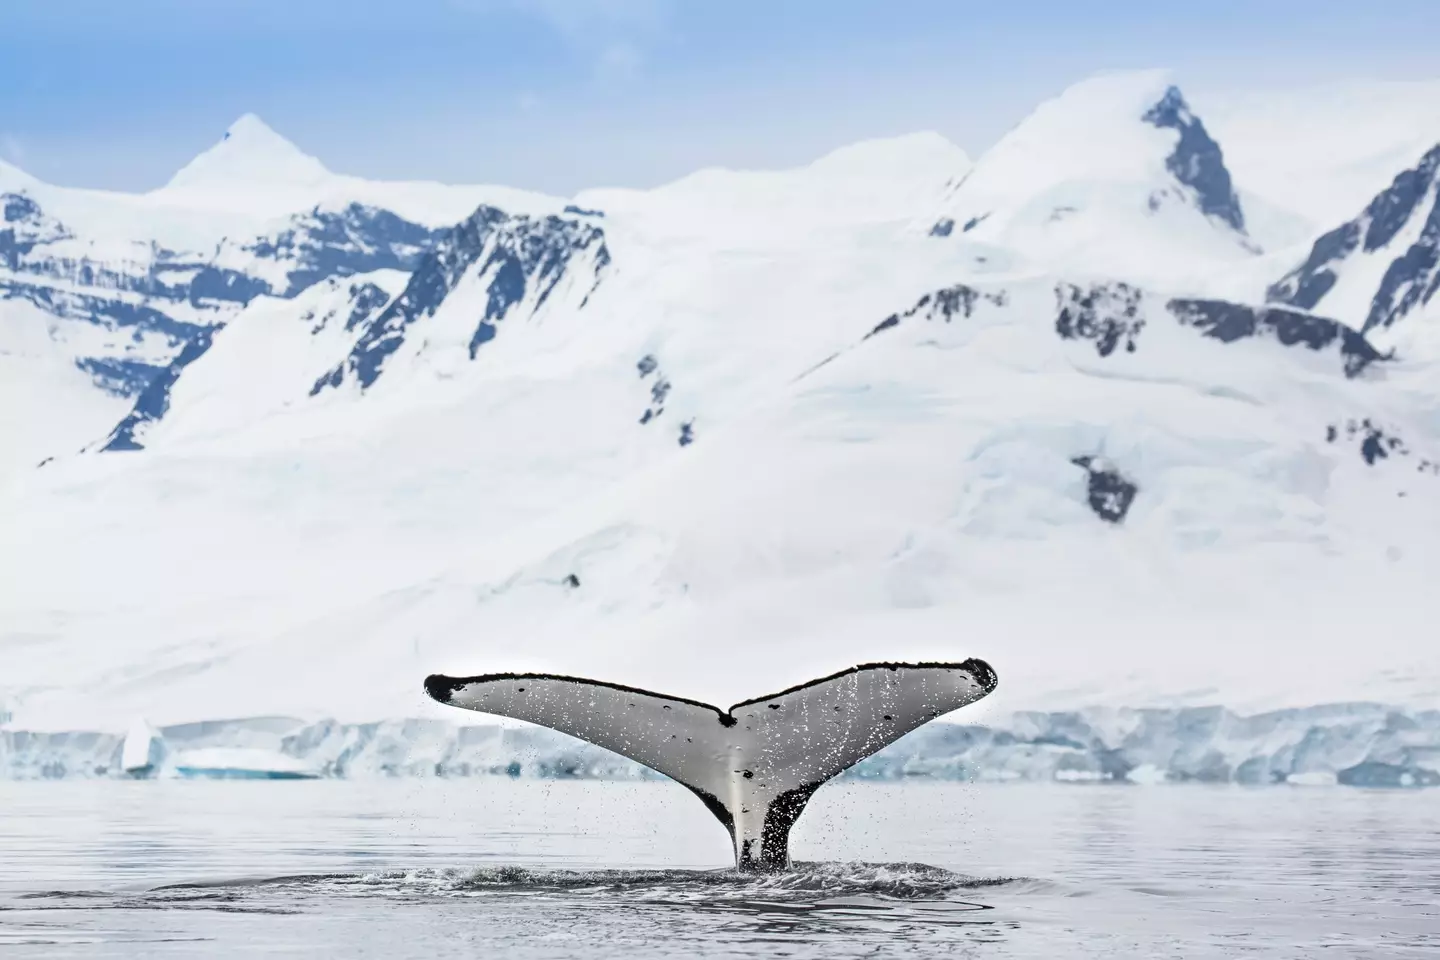 Many animals rely on the sea ice in Antarctica.